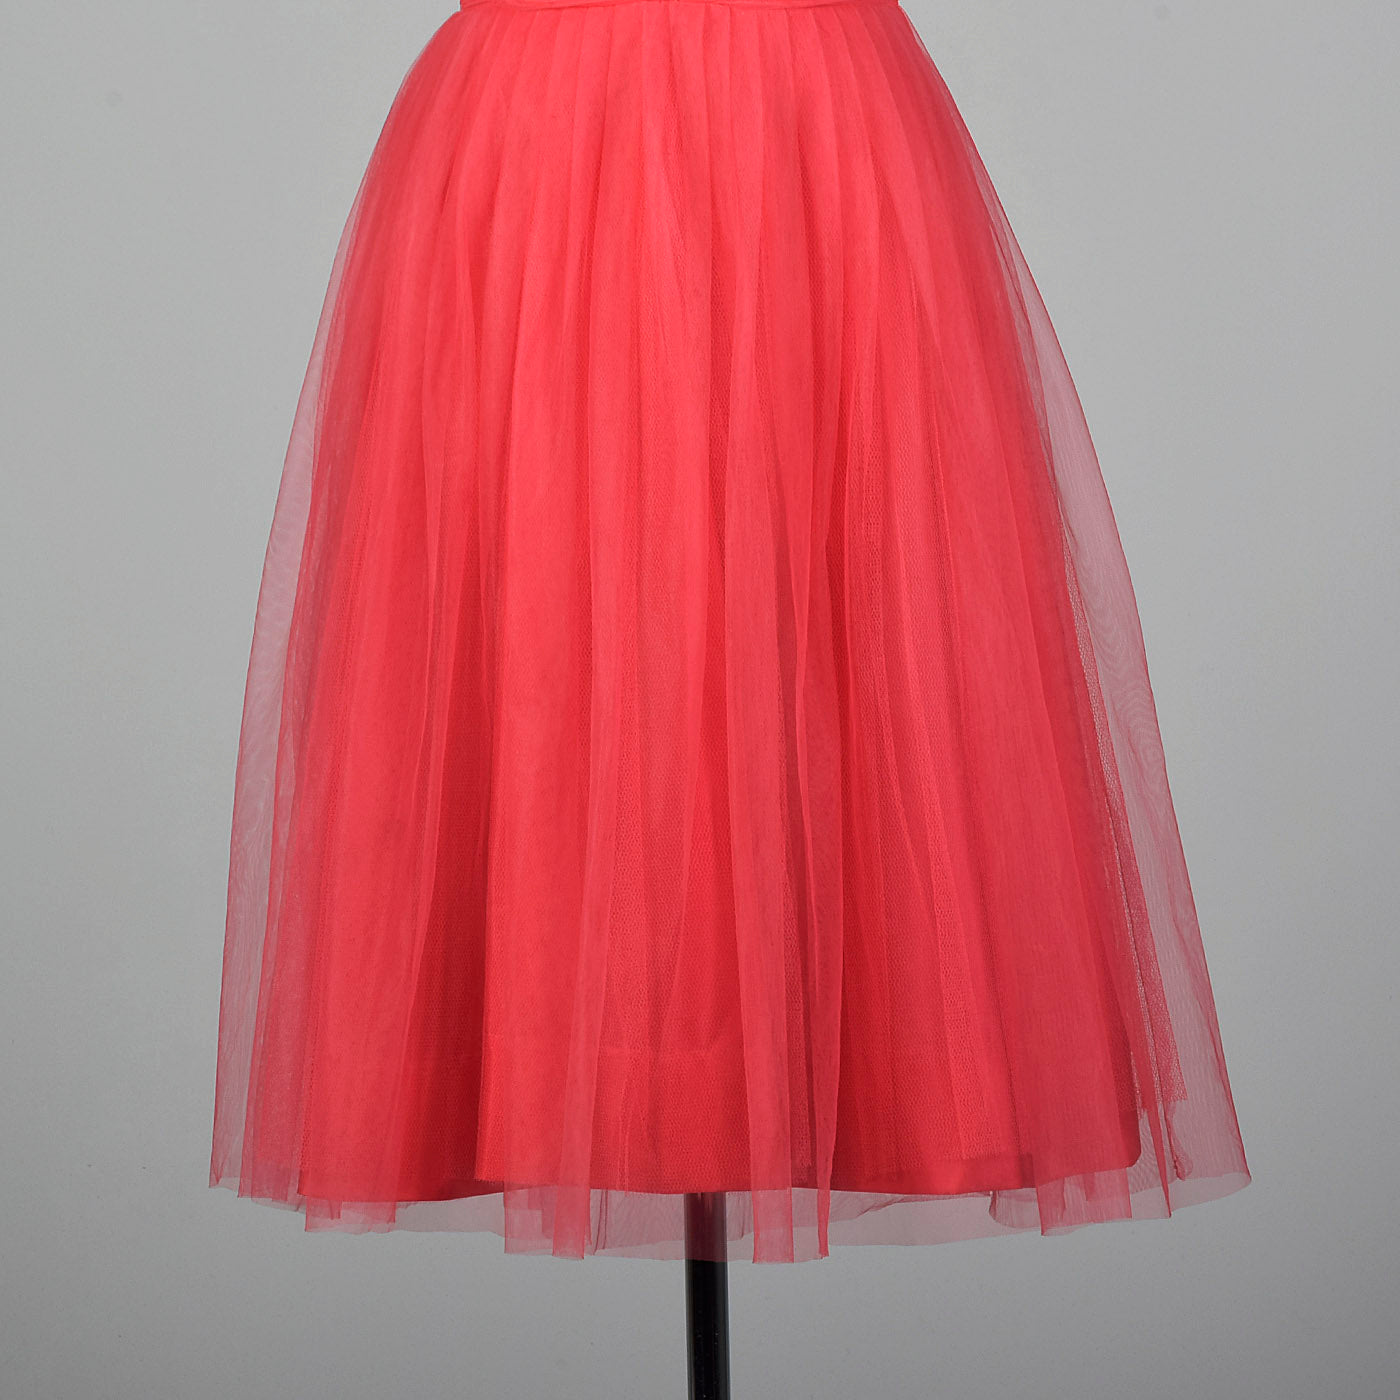 1950s Emma Domb Pink Tulle Party Dress